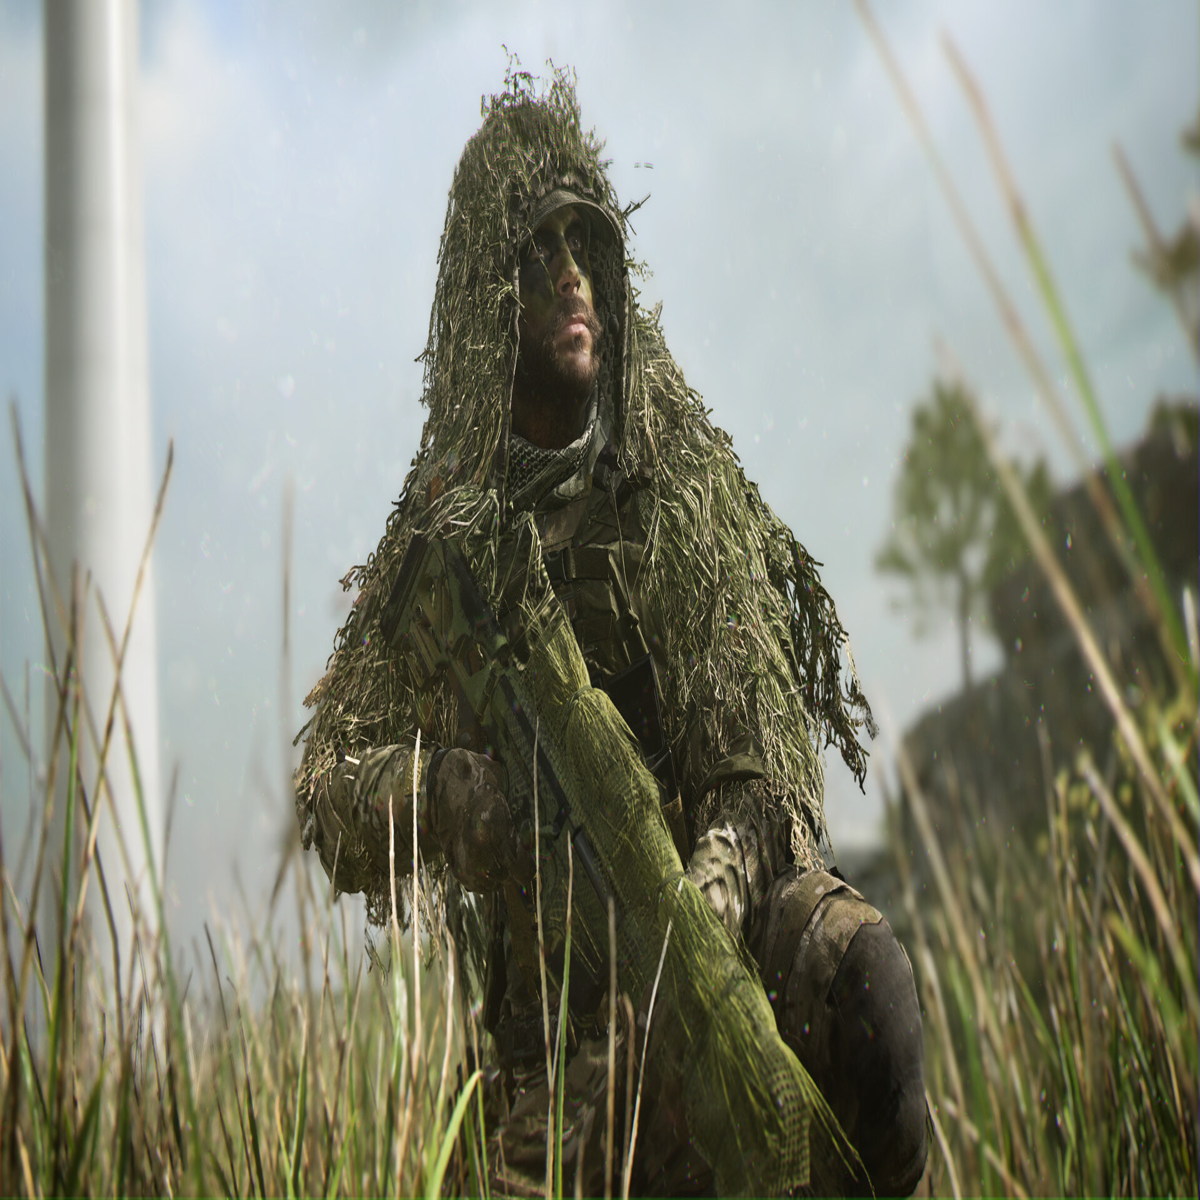 Unlike Overwatch 2, Modern Warfare 2's mobile phone requirement is PC-only